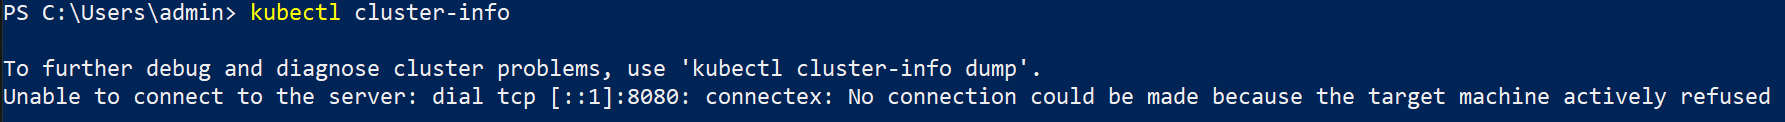 Getting an “Unable to connect to the server” error